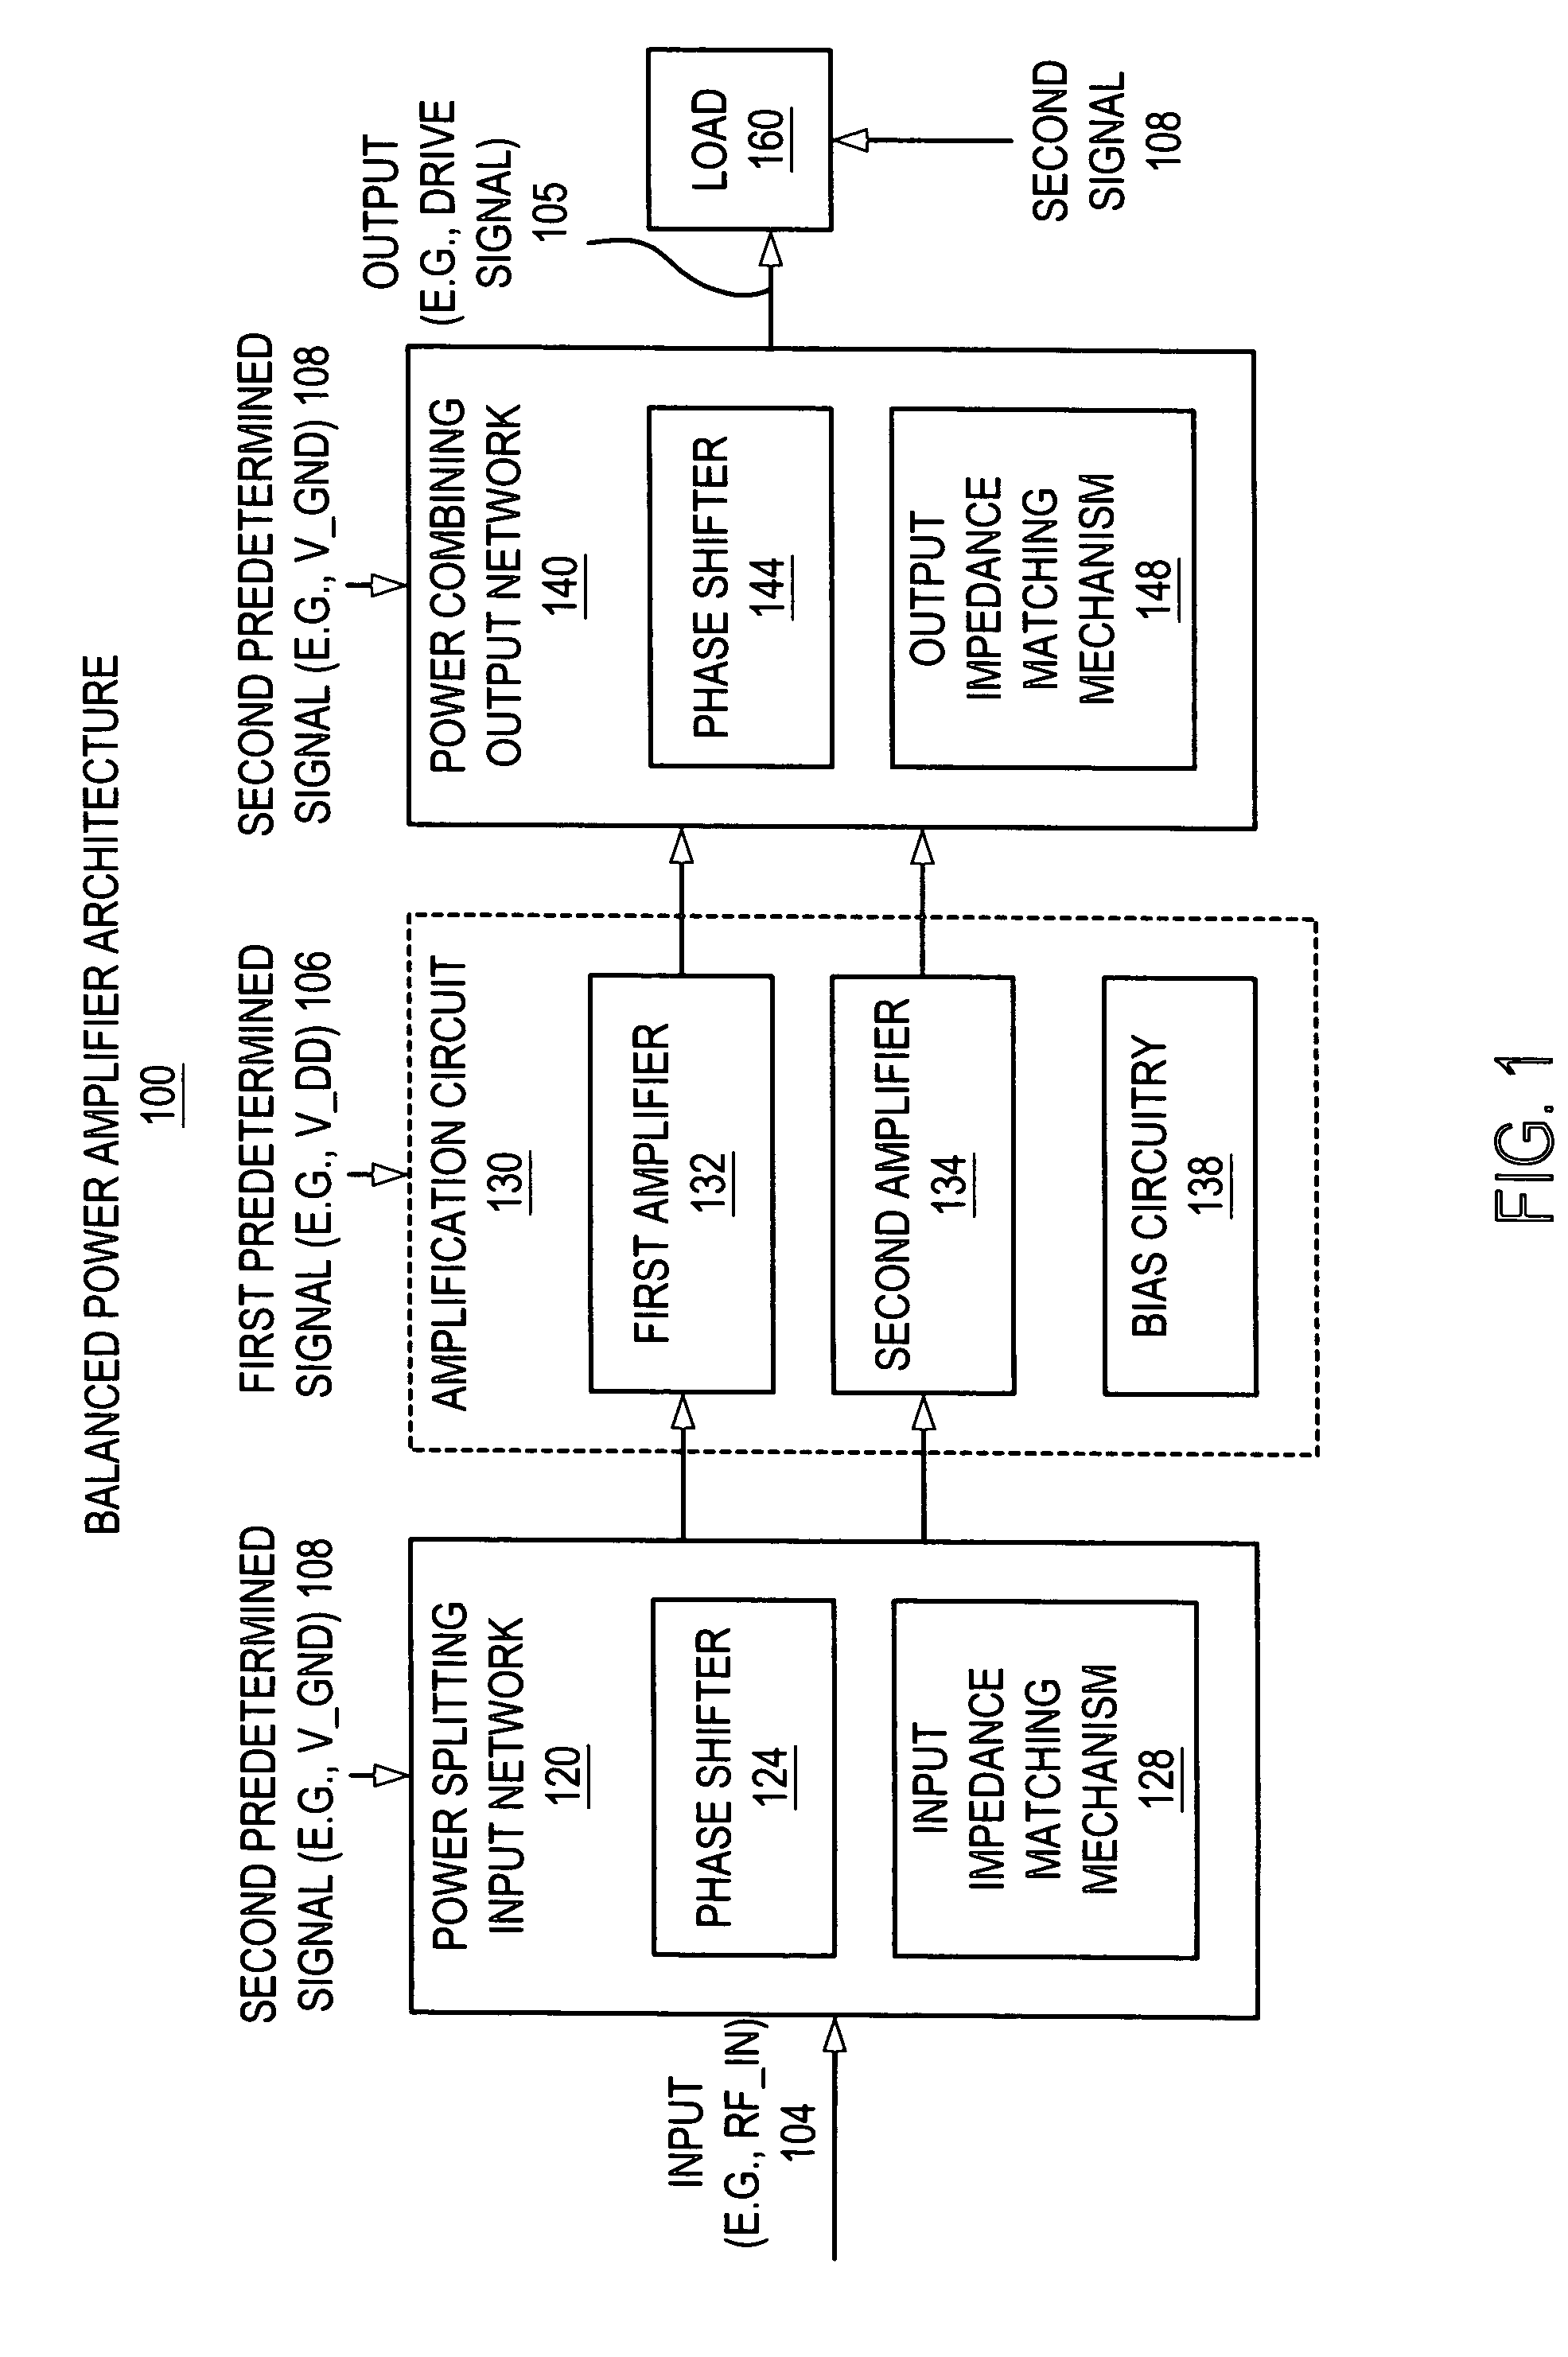 Power amplifier utilizing quadrature hybrid for power dividing, combining and impedance matching